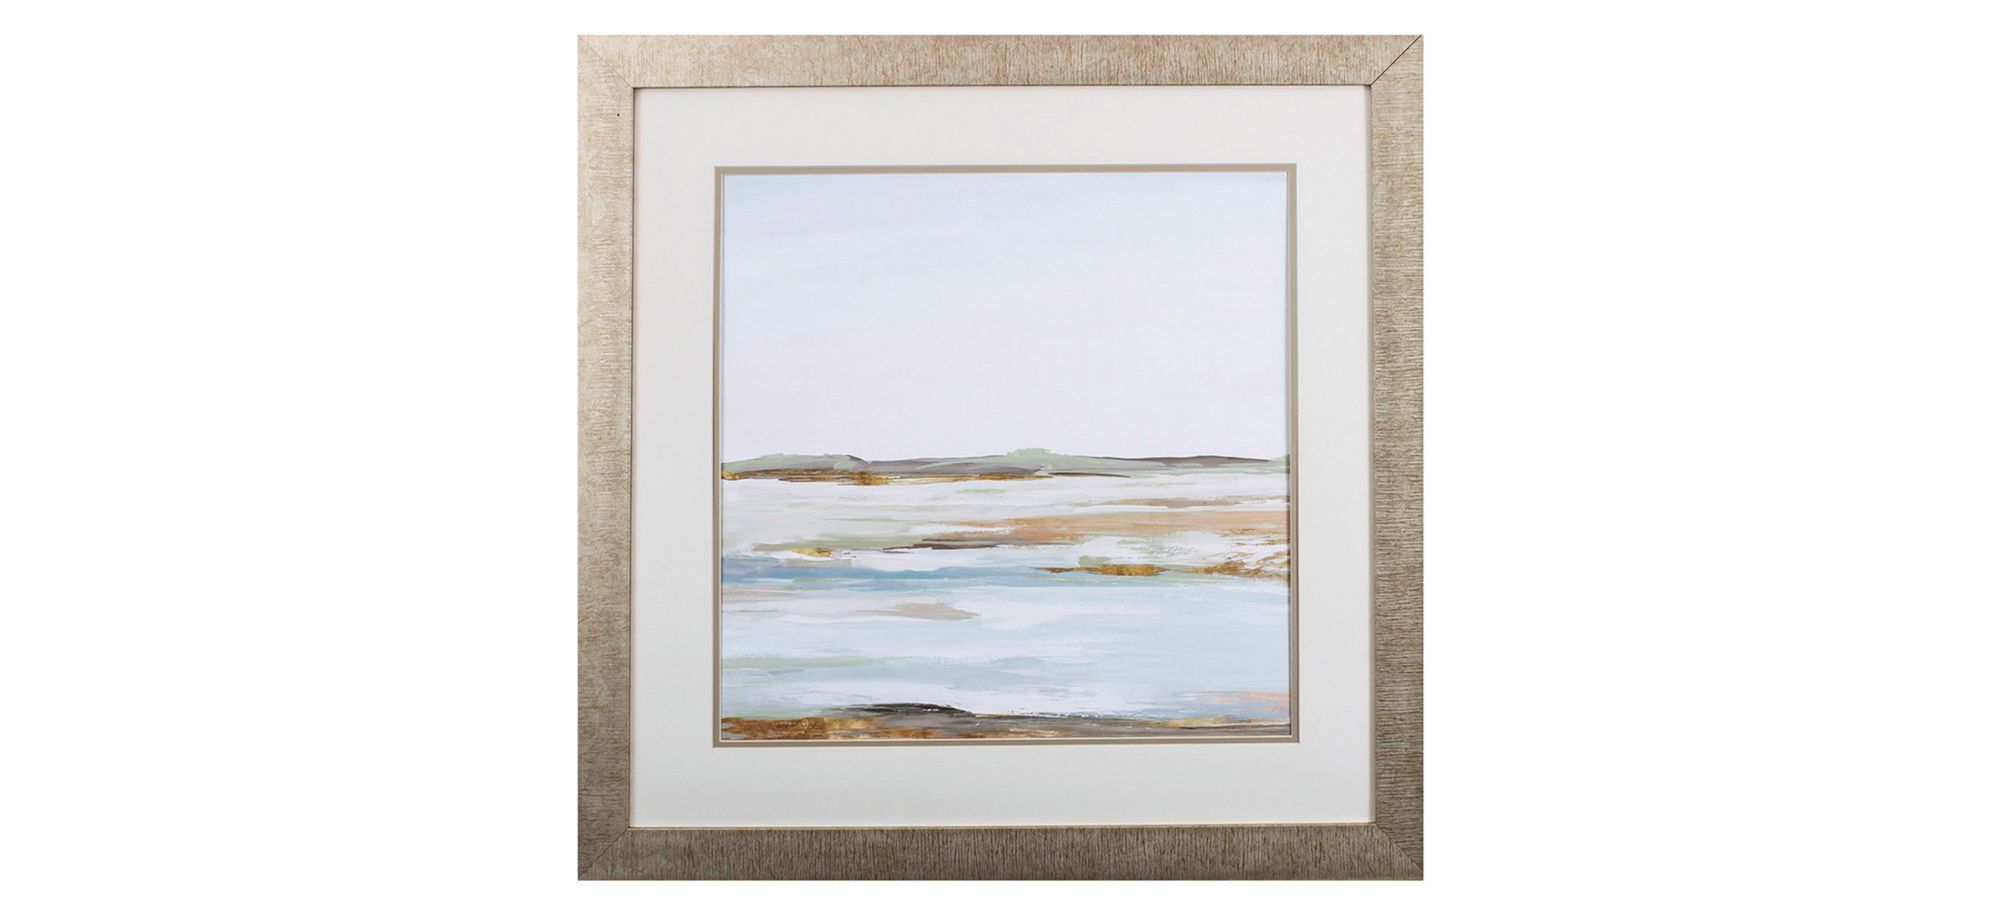 Vastness I Wall Art in Light Blue, Blush, Green by Propac Images